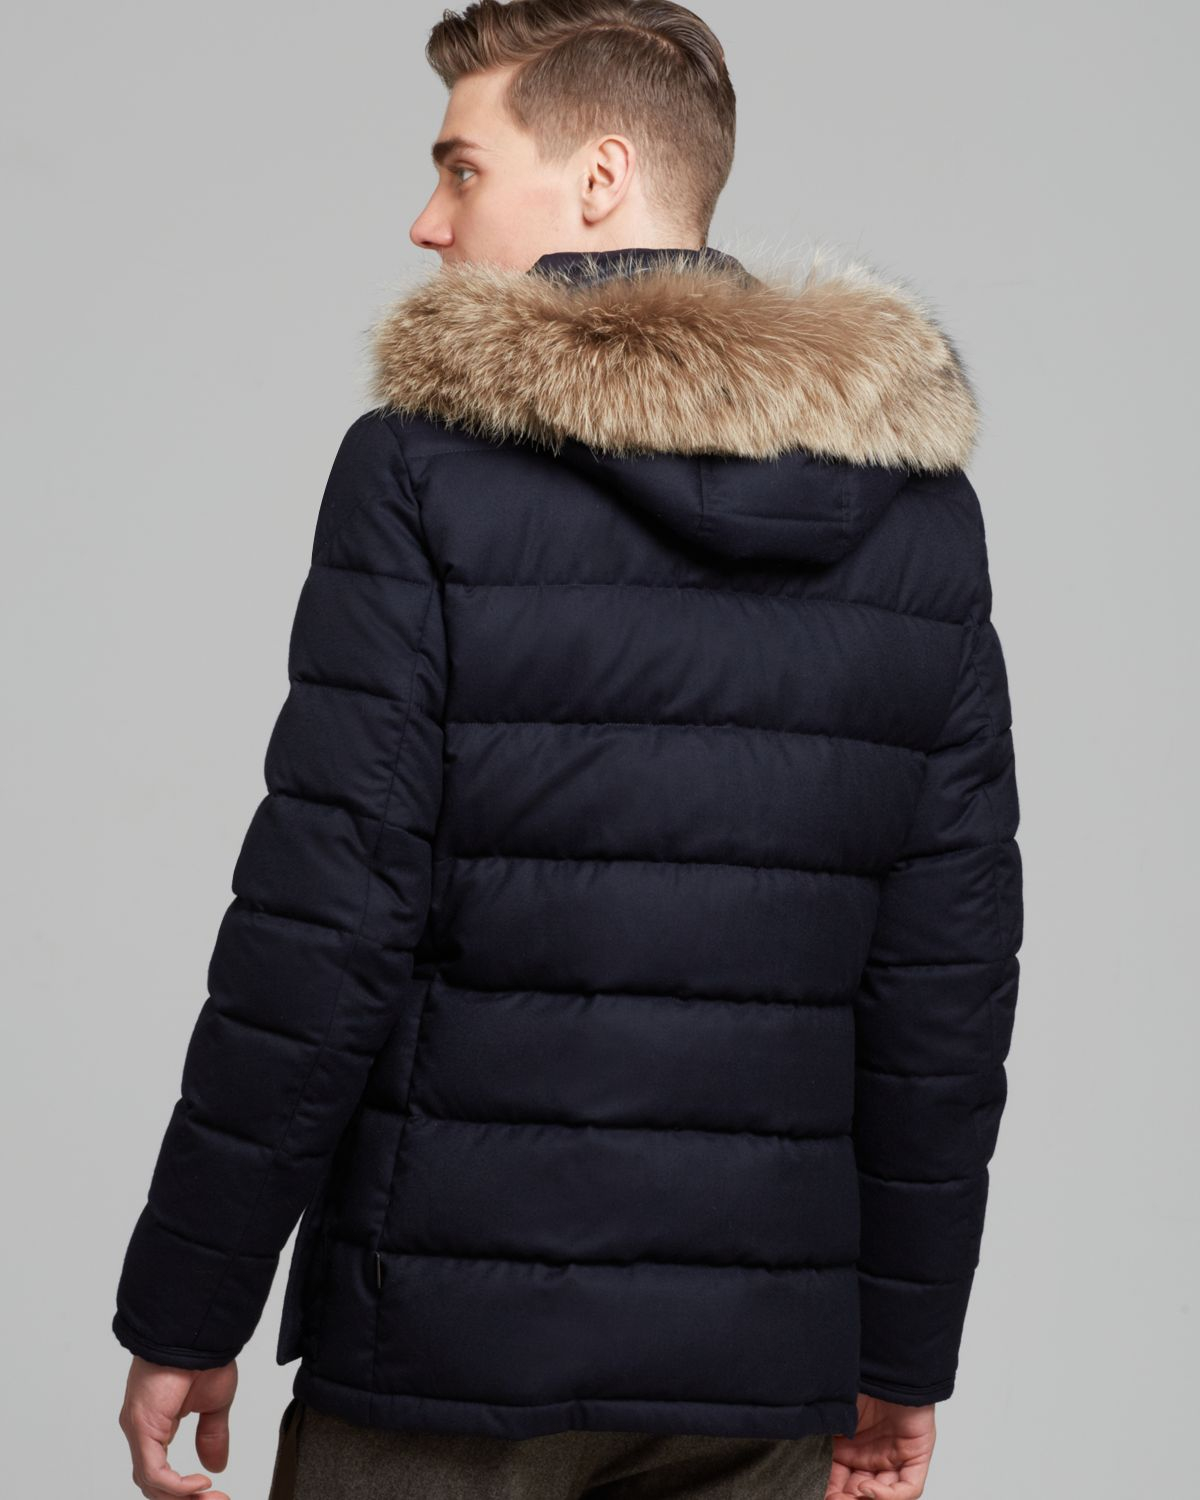 Lyst - Moncler Rethel Down Jacket With Fur Hood in Blue for Men